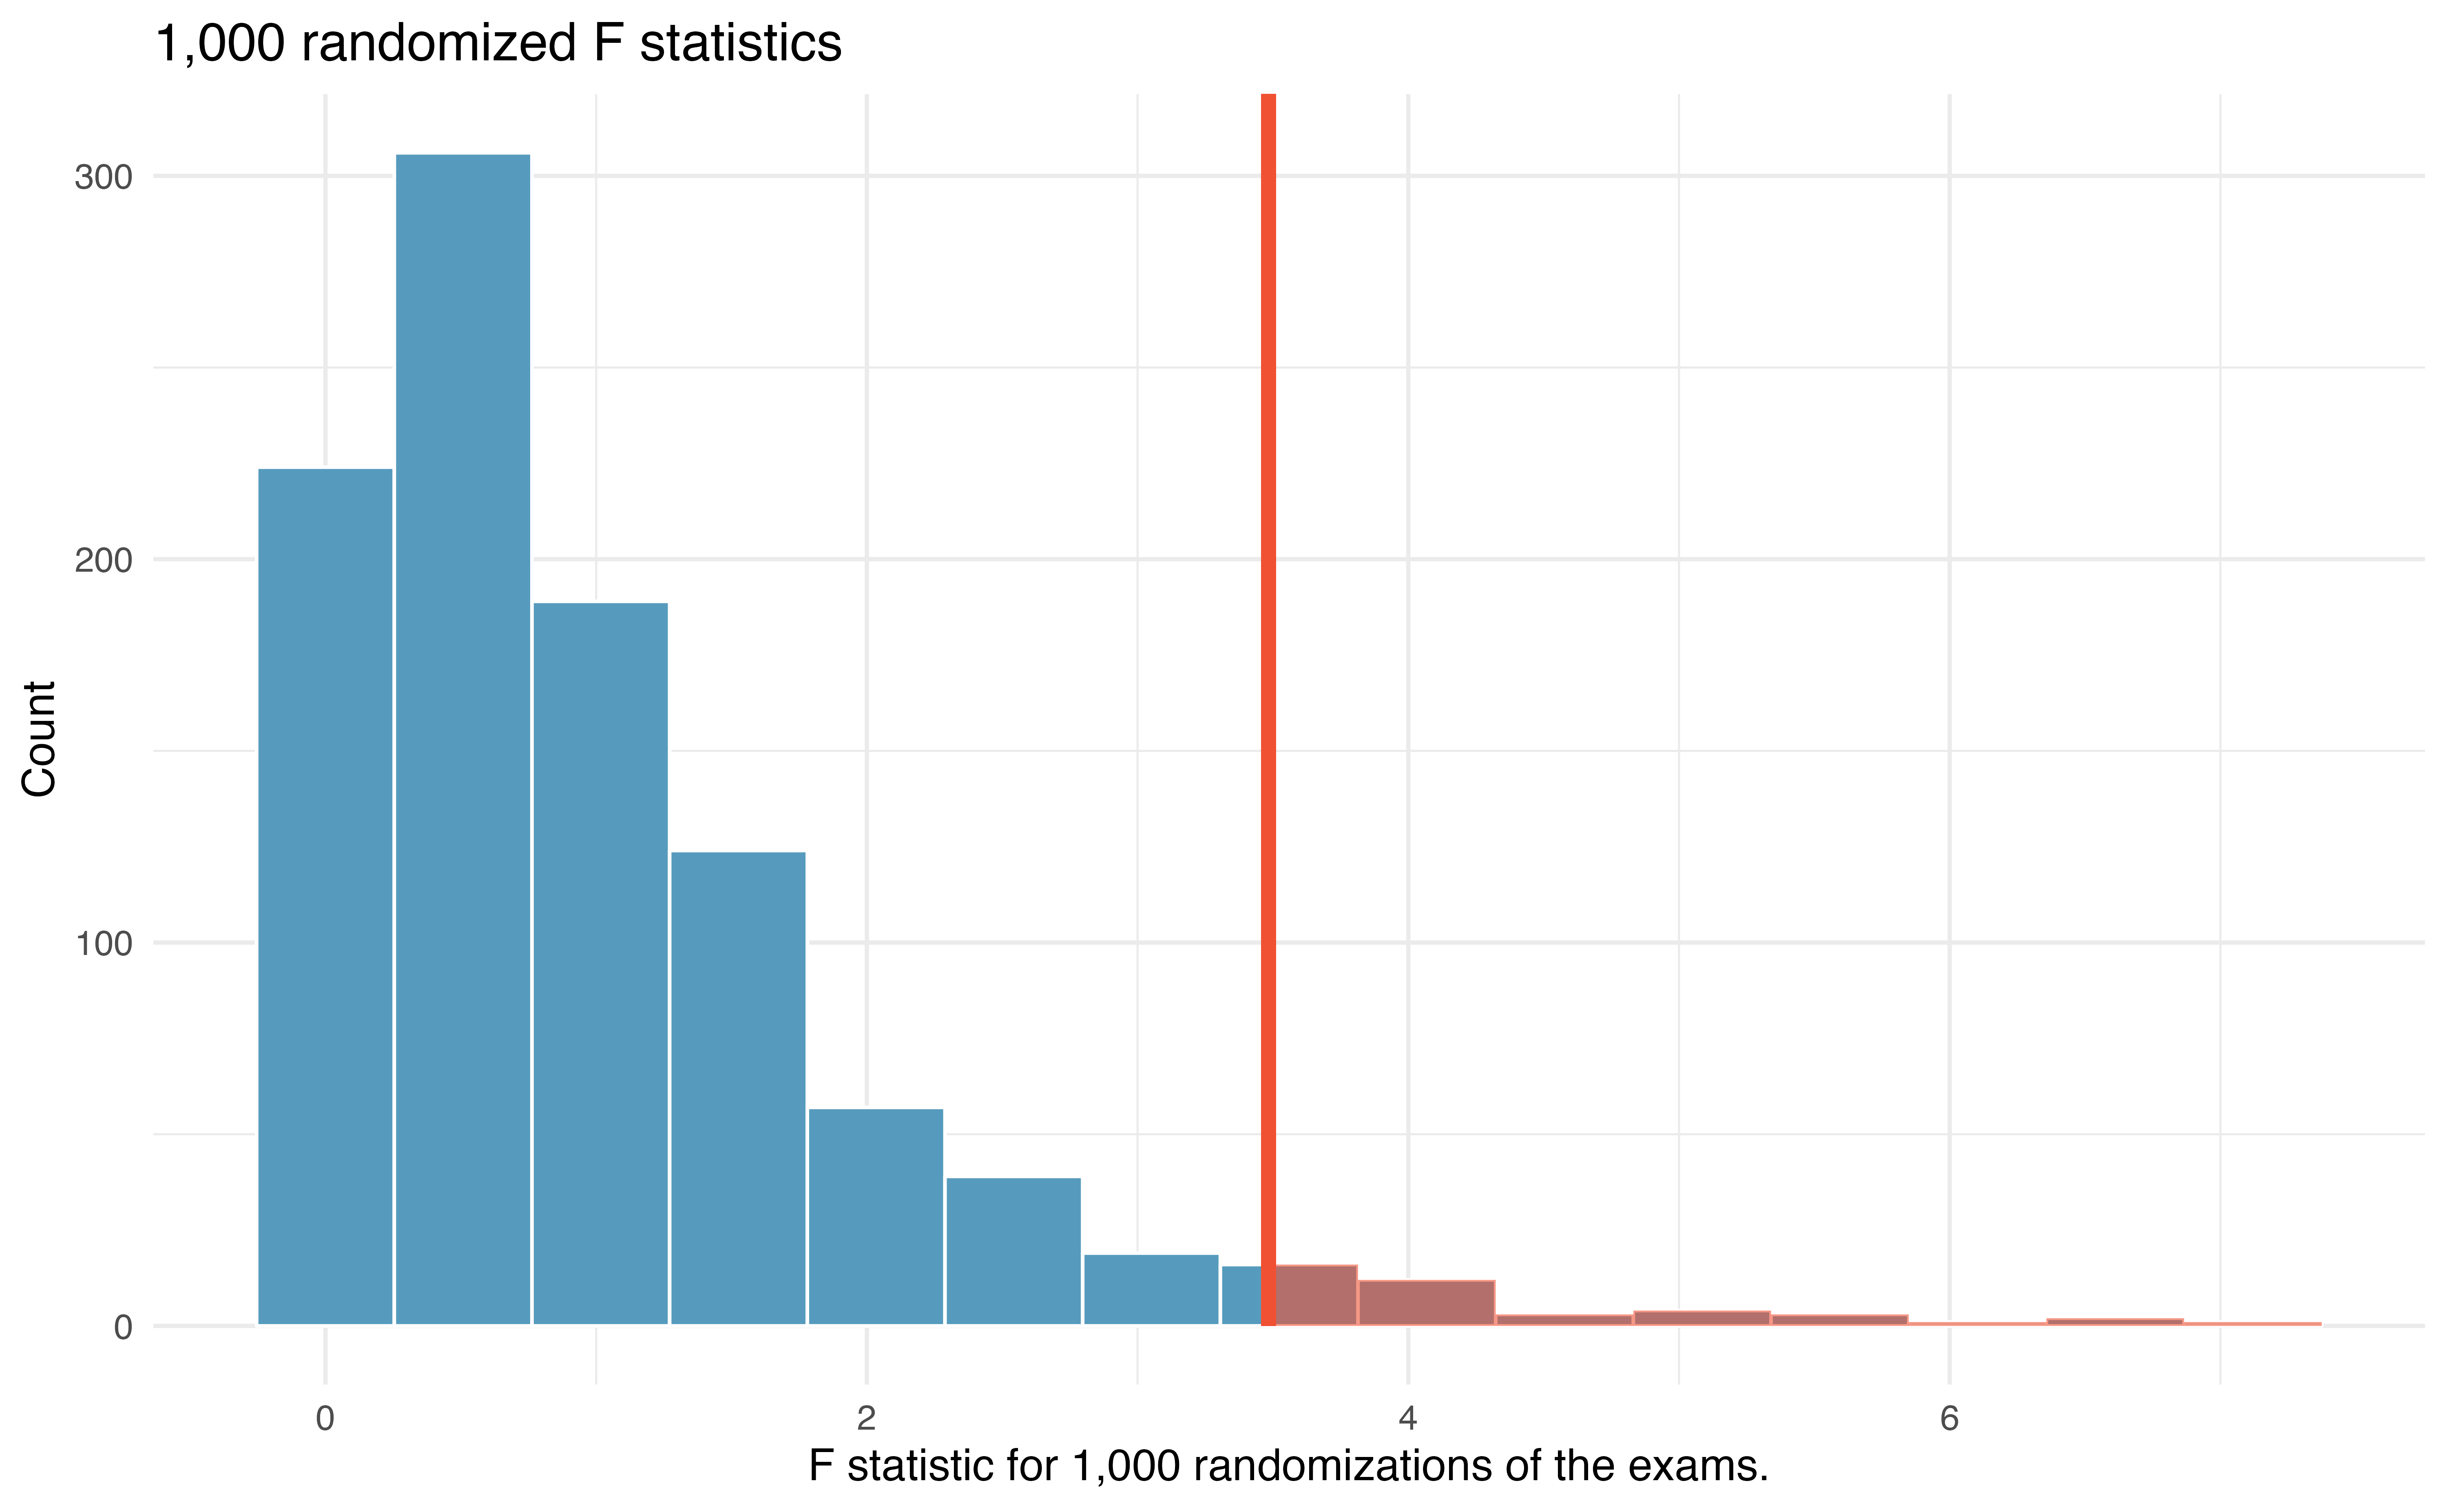 Histogram of the F statistics that were calculated from 1000 different randomizations of the exam type.  The distribution is right-skewed with most of the values less than 2.  The tail extends to about 6.  The observed F statistic is given as a red vertical line at 3.48.  The area to the right of 3.48 is more extreme than the observed value and represents the p-value.